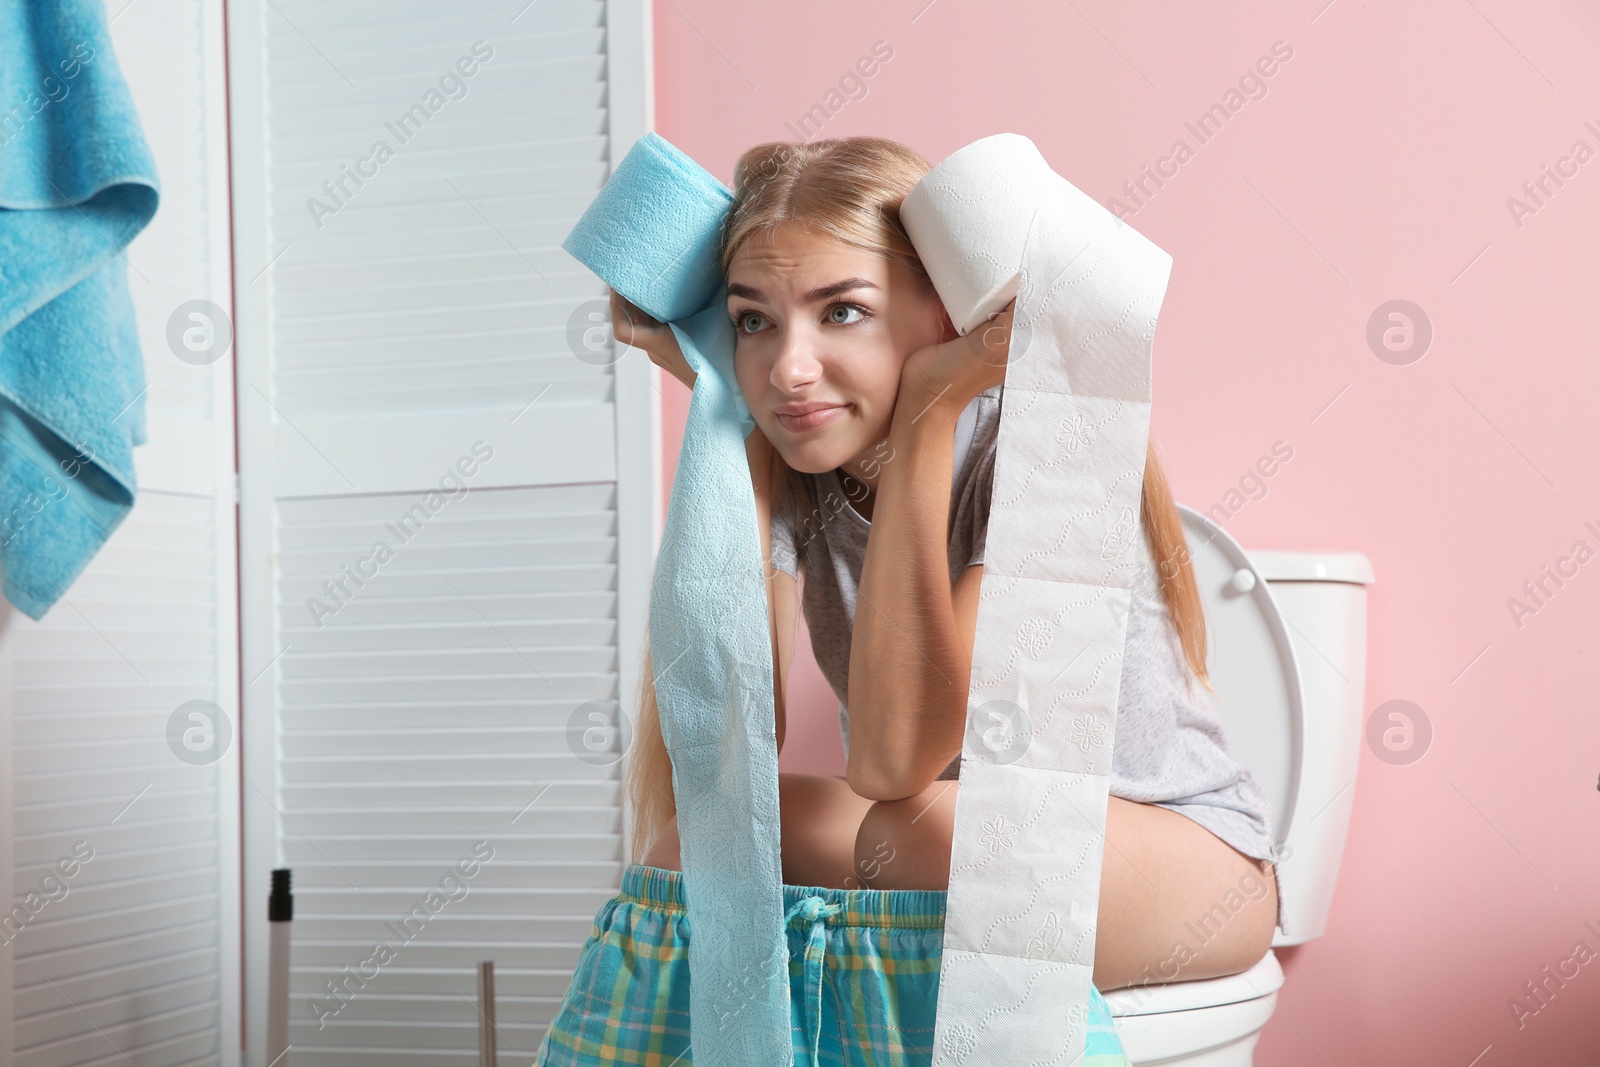 Photo of Woman with paper rolls sitting on toilet bowl in bathroom